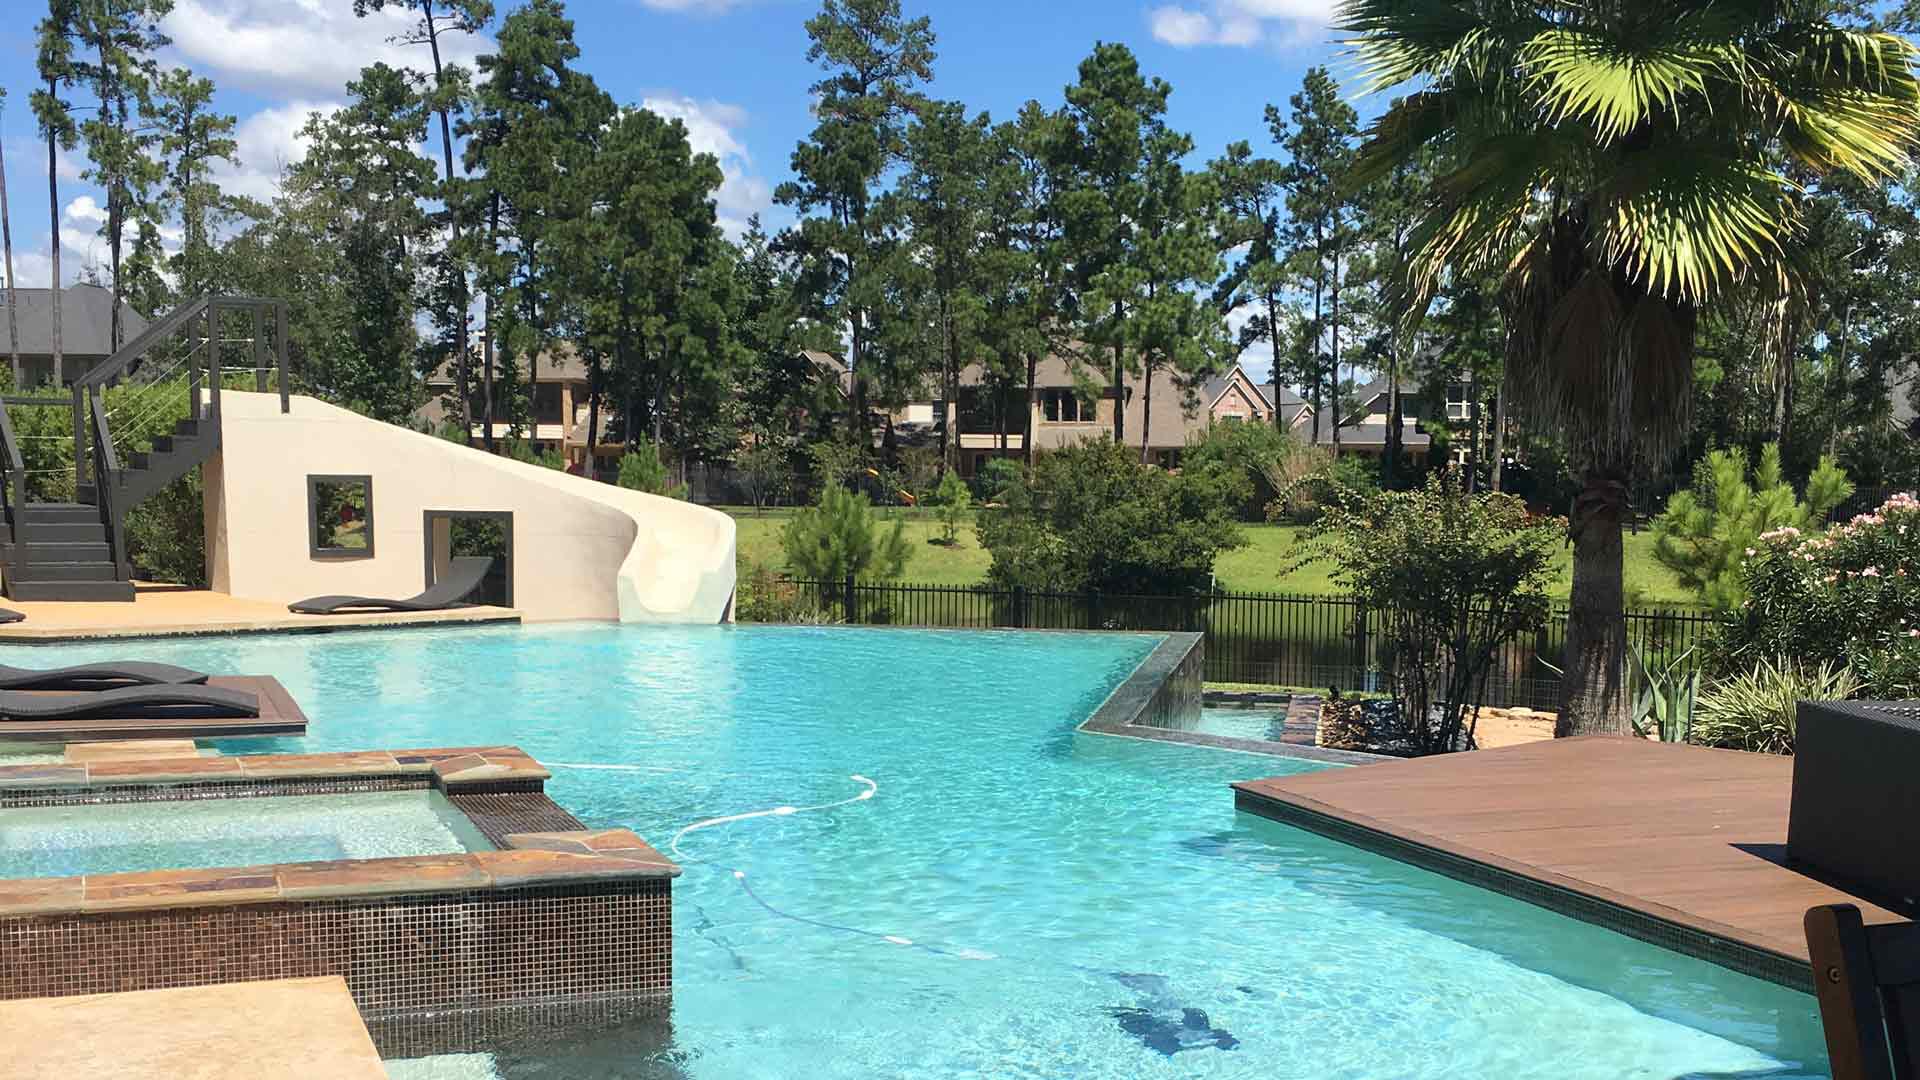 The Pool Whisperer is Spring’s premier swimming pool contractor. We are a family-owned company speci The Pool Whisperer Spring (832)515-5774